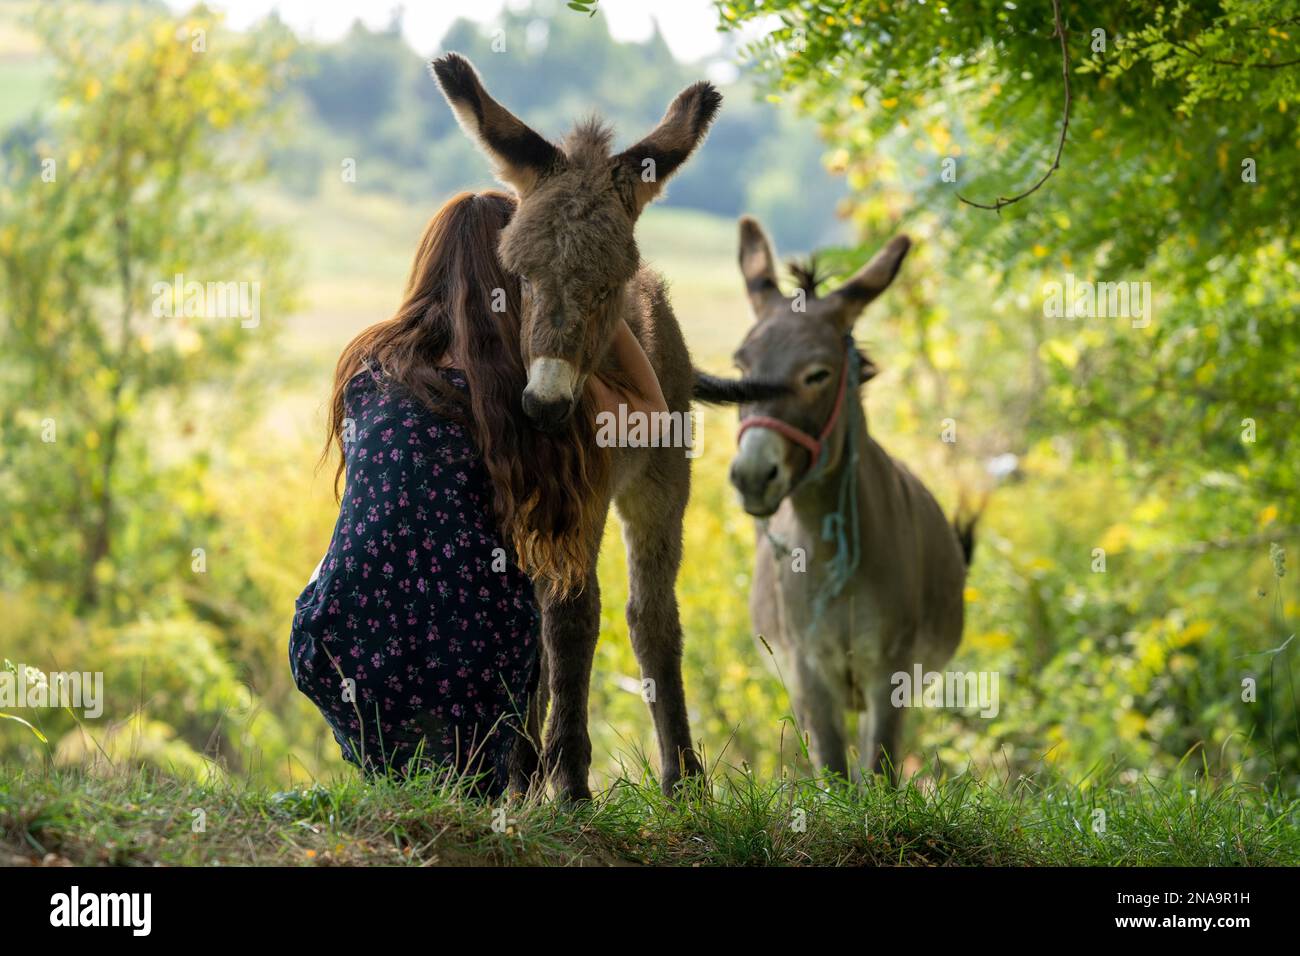 A woman crouching down to hug the neck of a donkey in the countryside of Romania; Biertan, Transylvania, Romania Stock Photo